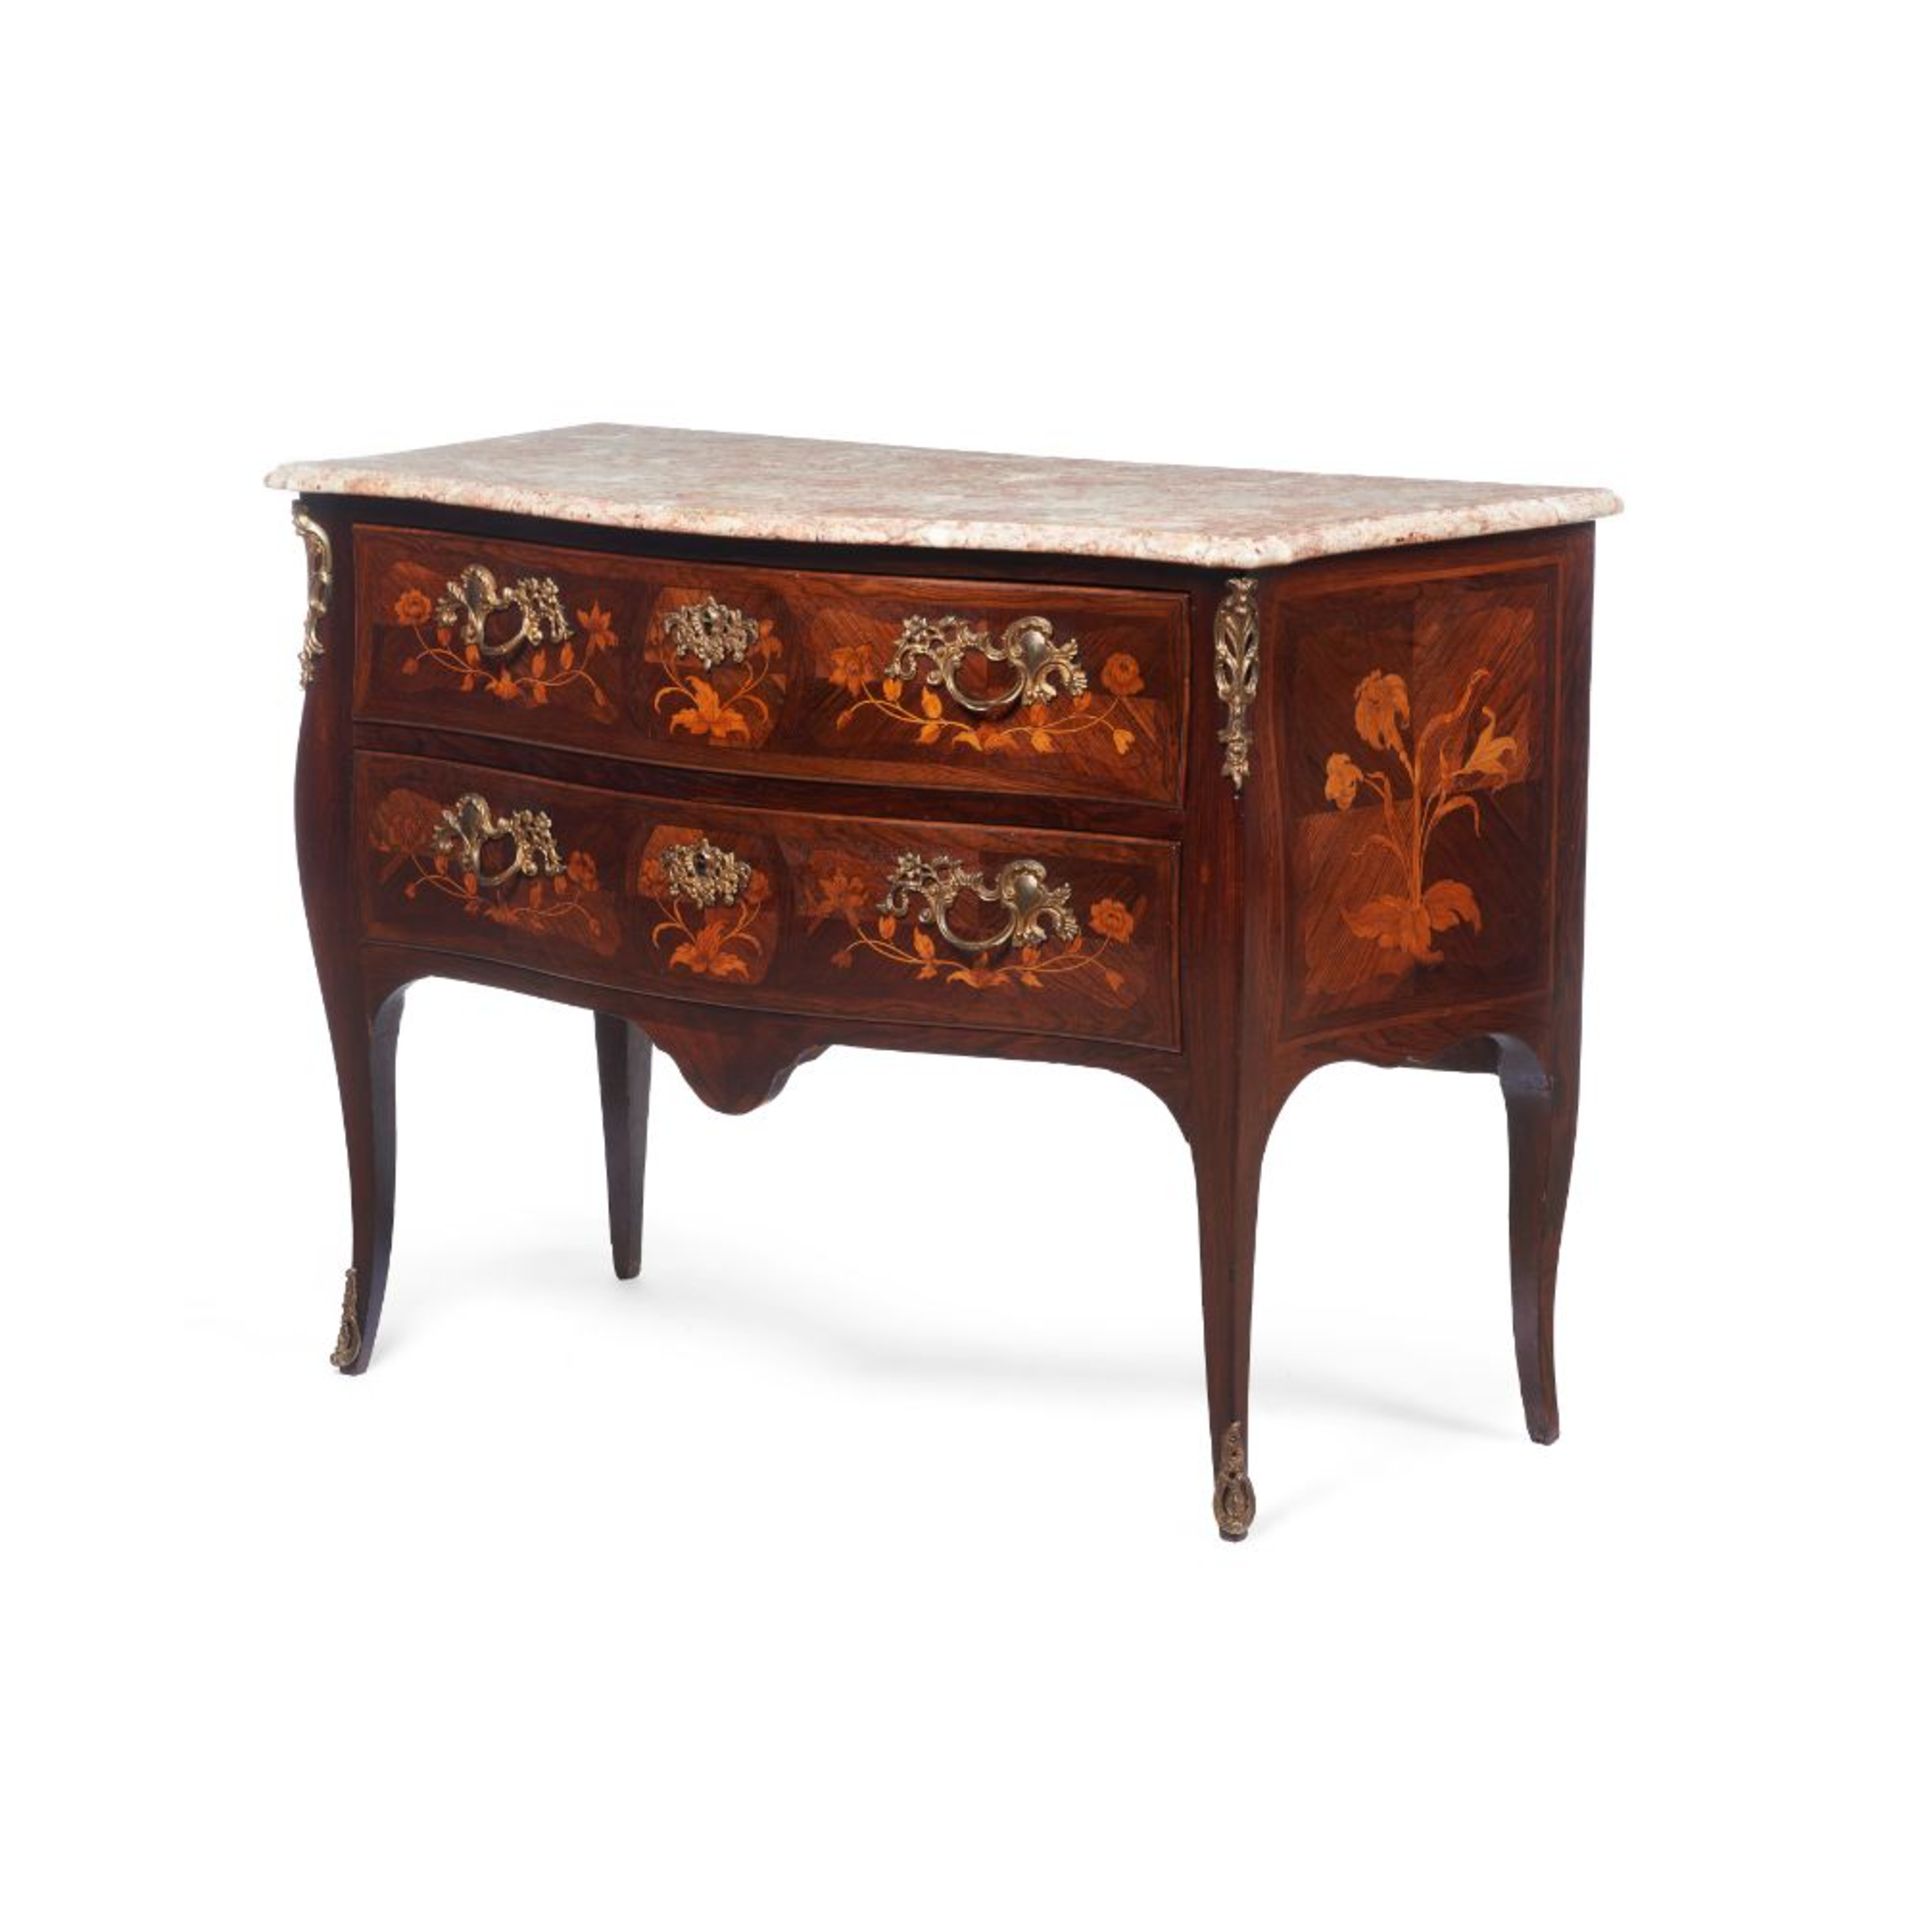 A D.José/D. Maria chest of drawers, Rosewood veneered of rosewood and other woods floral marquetry